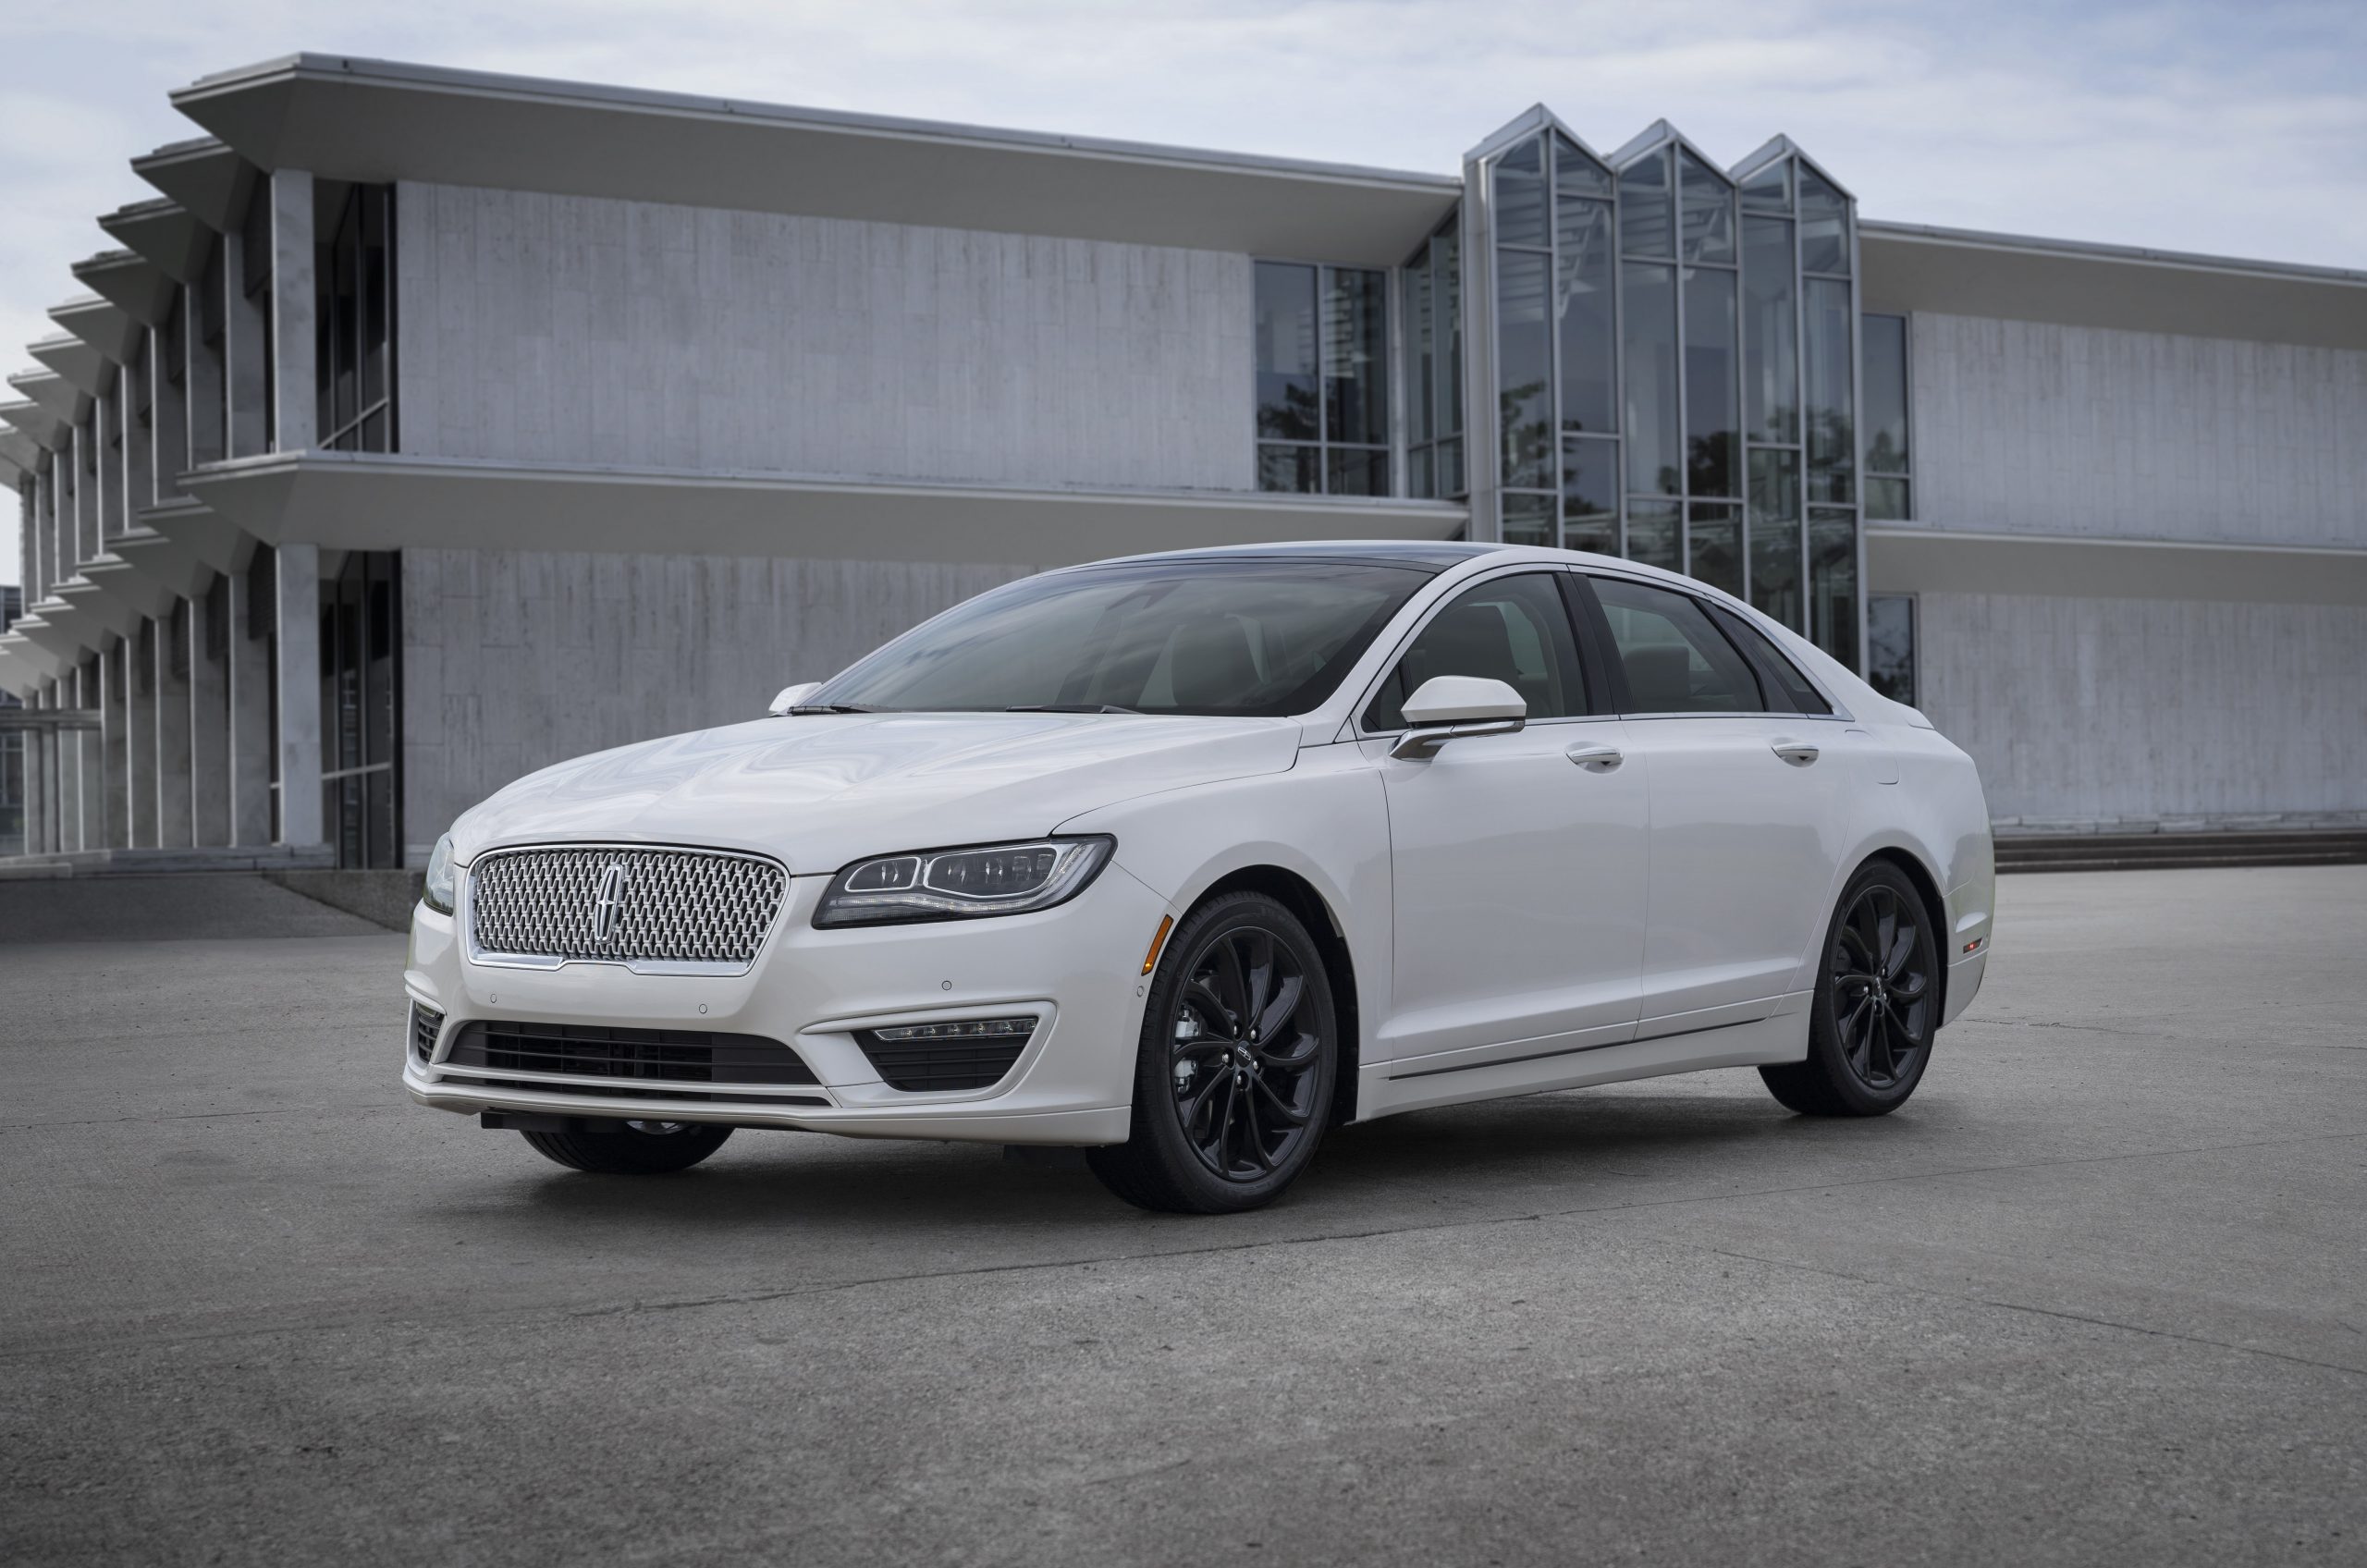 The Proud Lincoln MKZ Sedan has been officially retired CarThrust